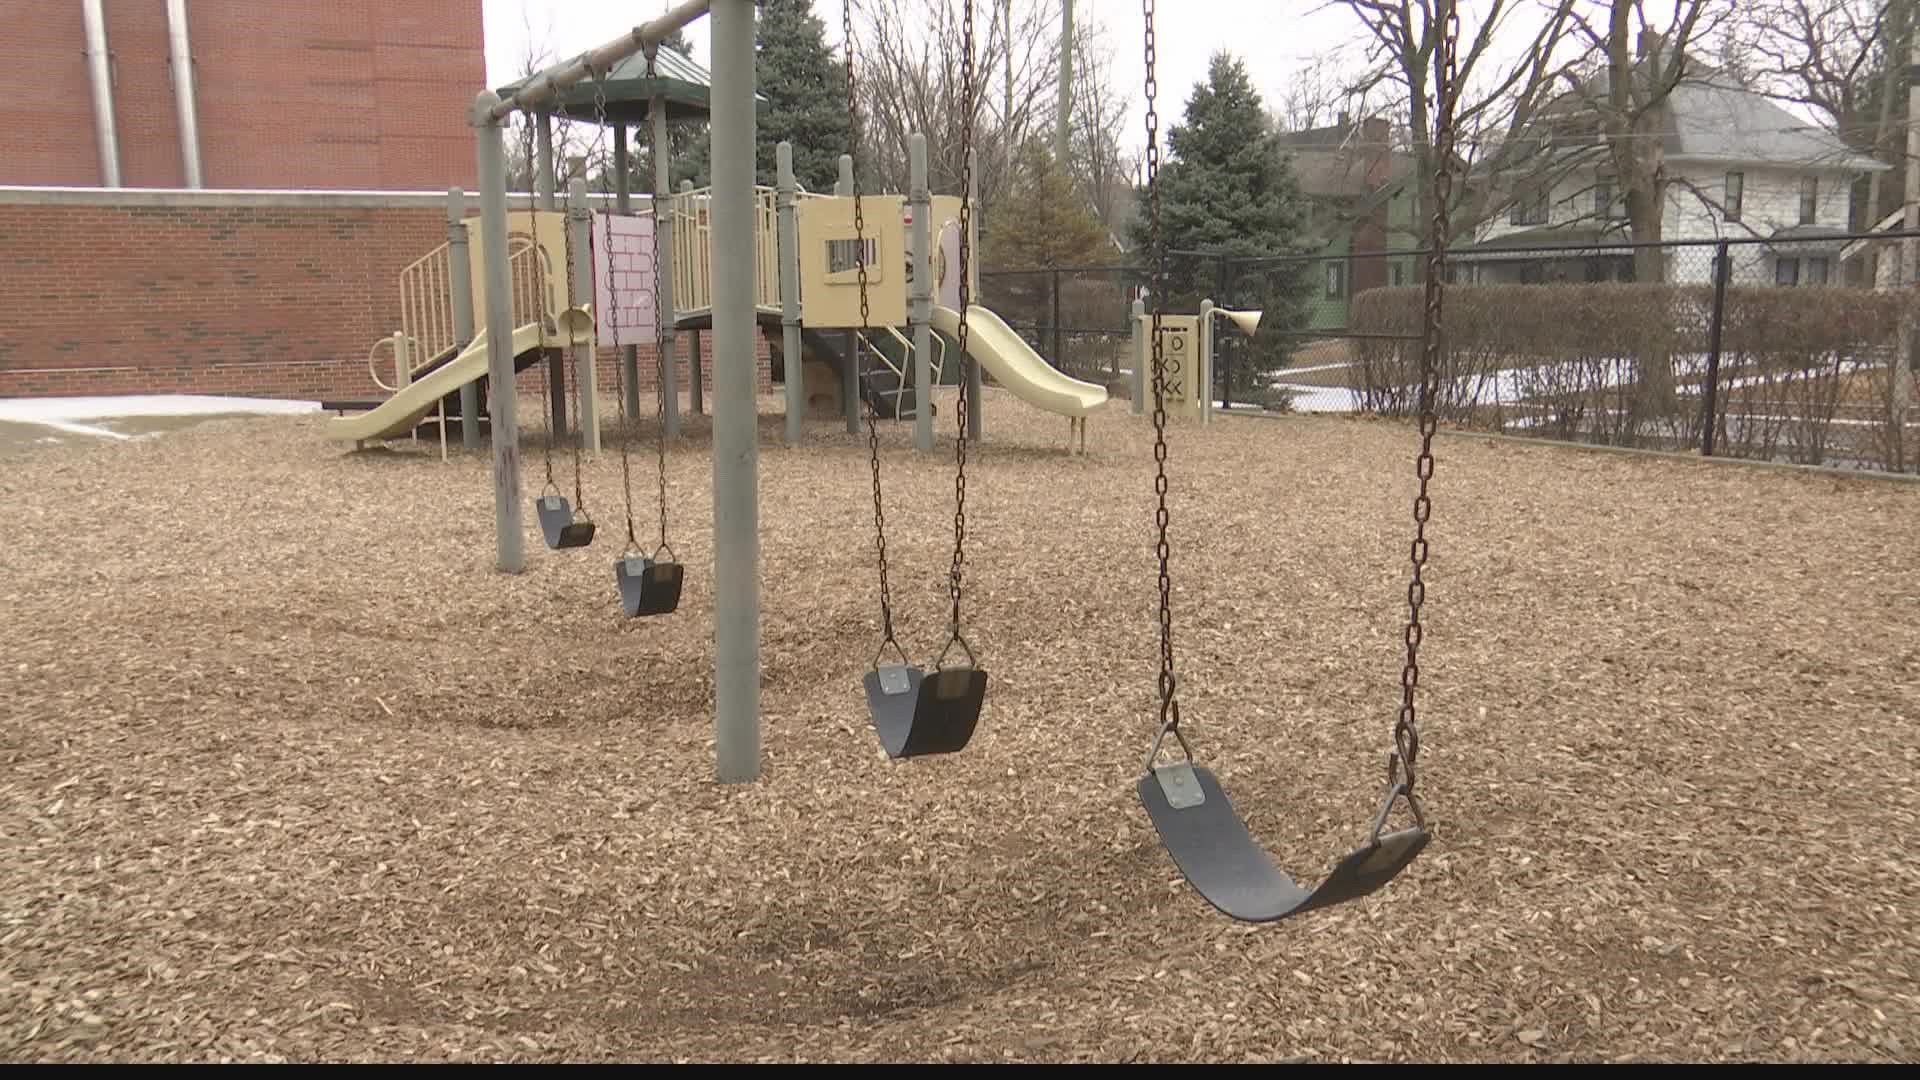 Her school is now raising money for a school playground makeover in her honor.